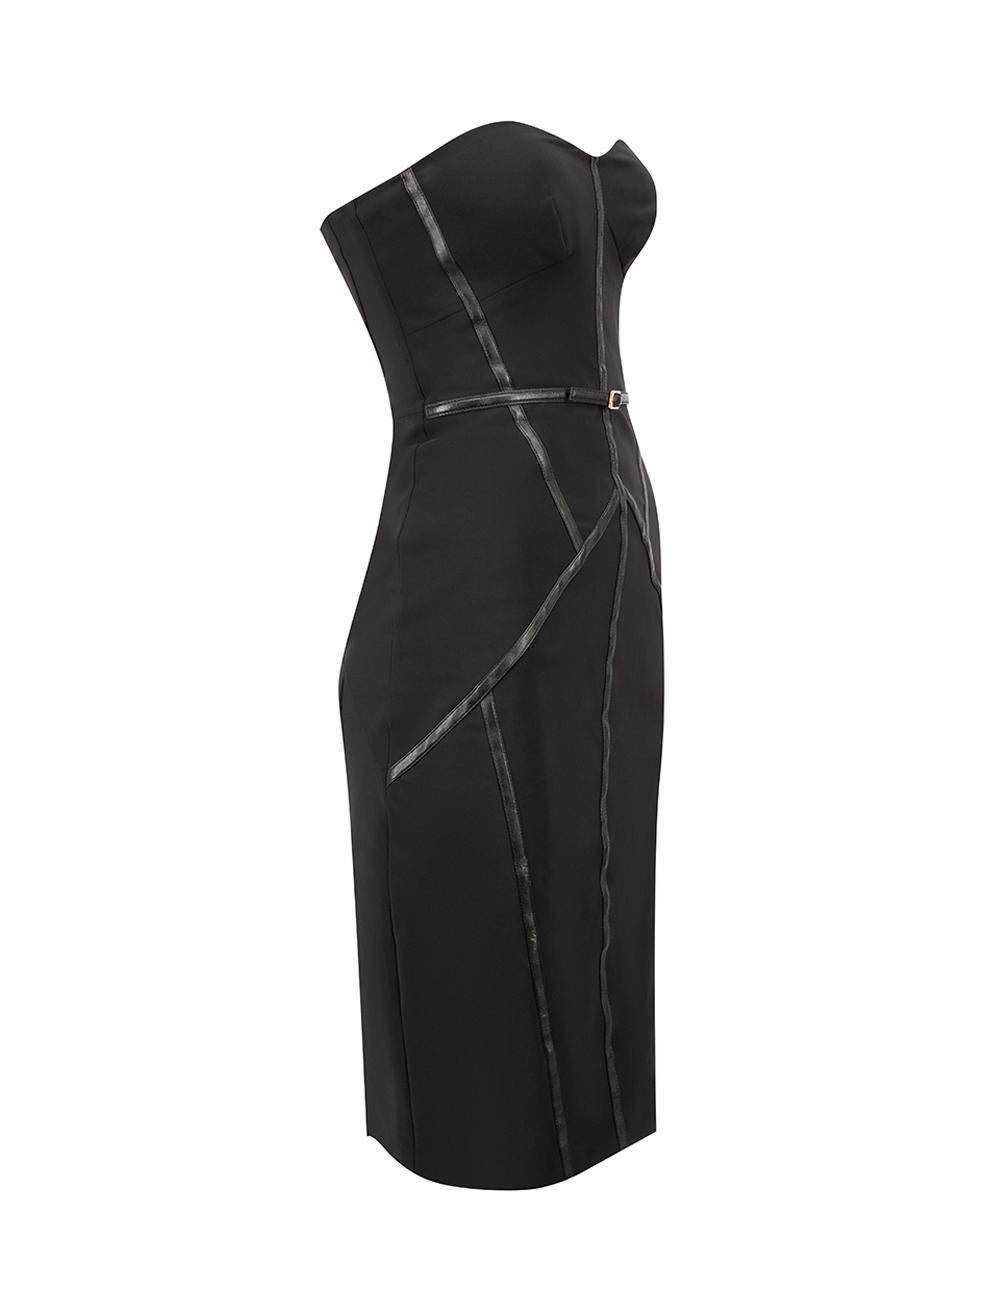 CONDITION is Good. Minor wear to dress is evident. Light wear to the underarm lining with the boning poking through the seam. There is a pull to the weave at the front and puckering to the faux-leather trim on this used Elisabetta Franchi designer